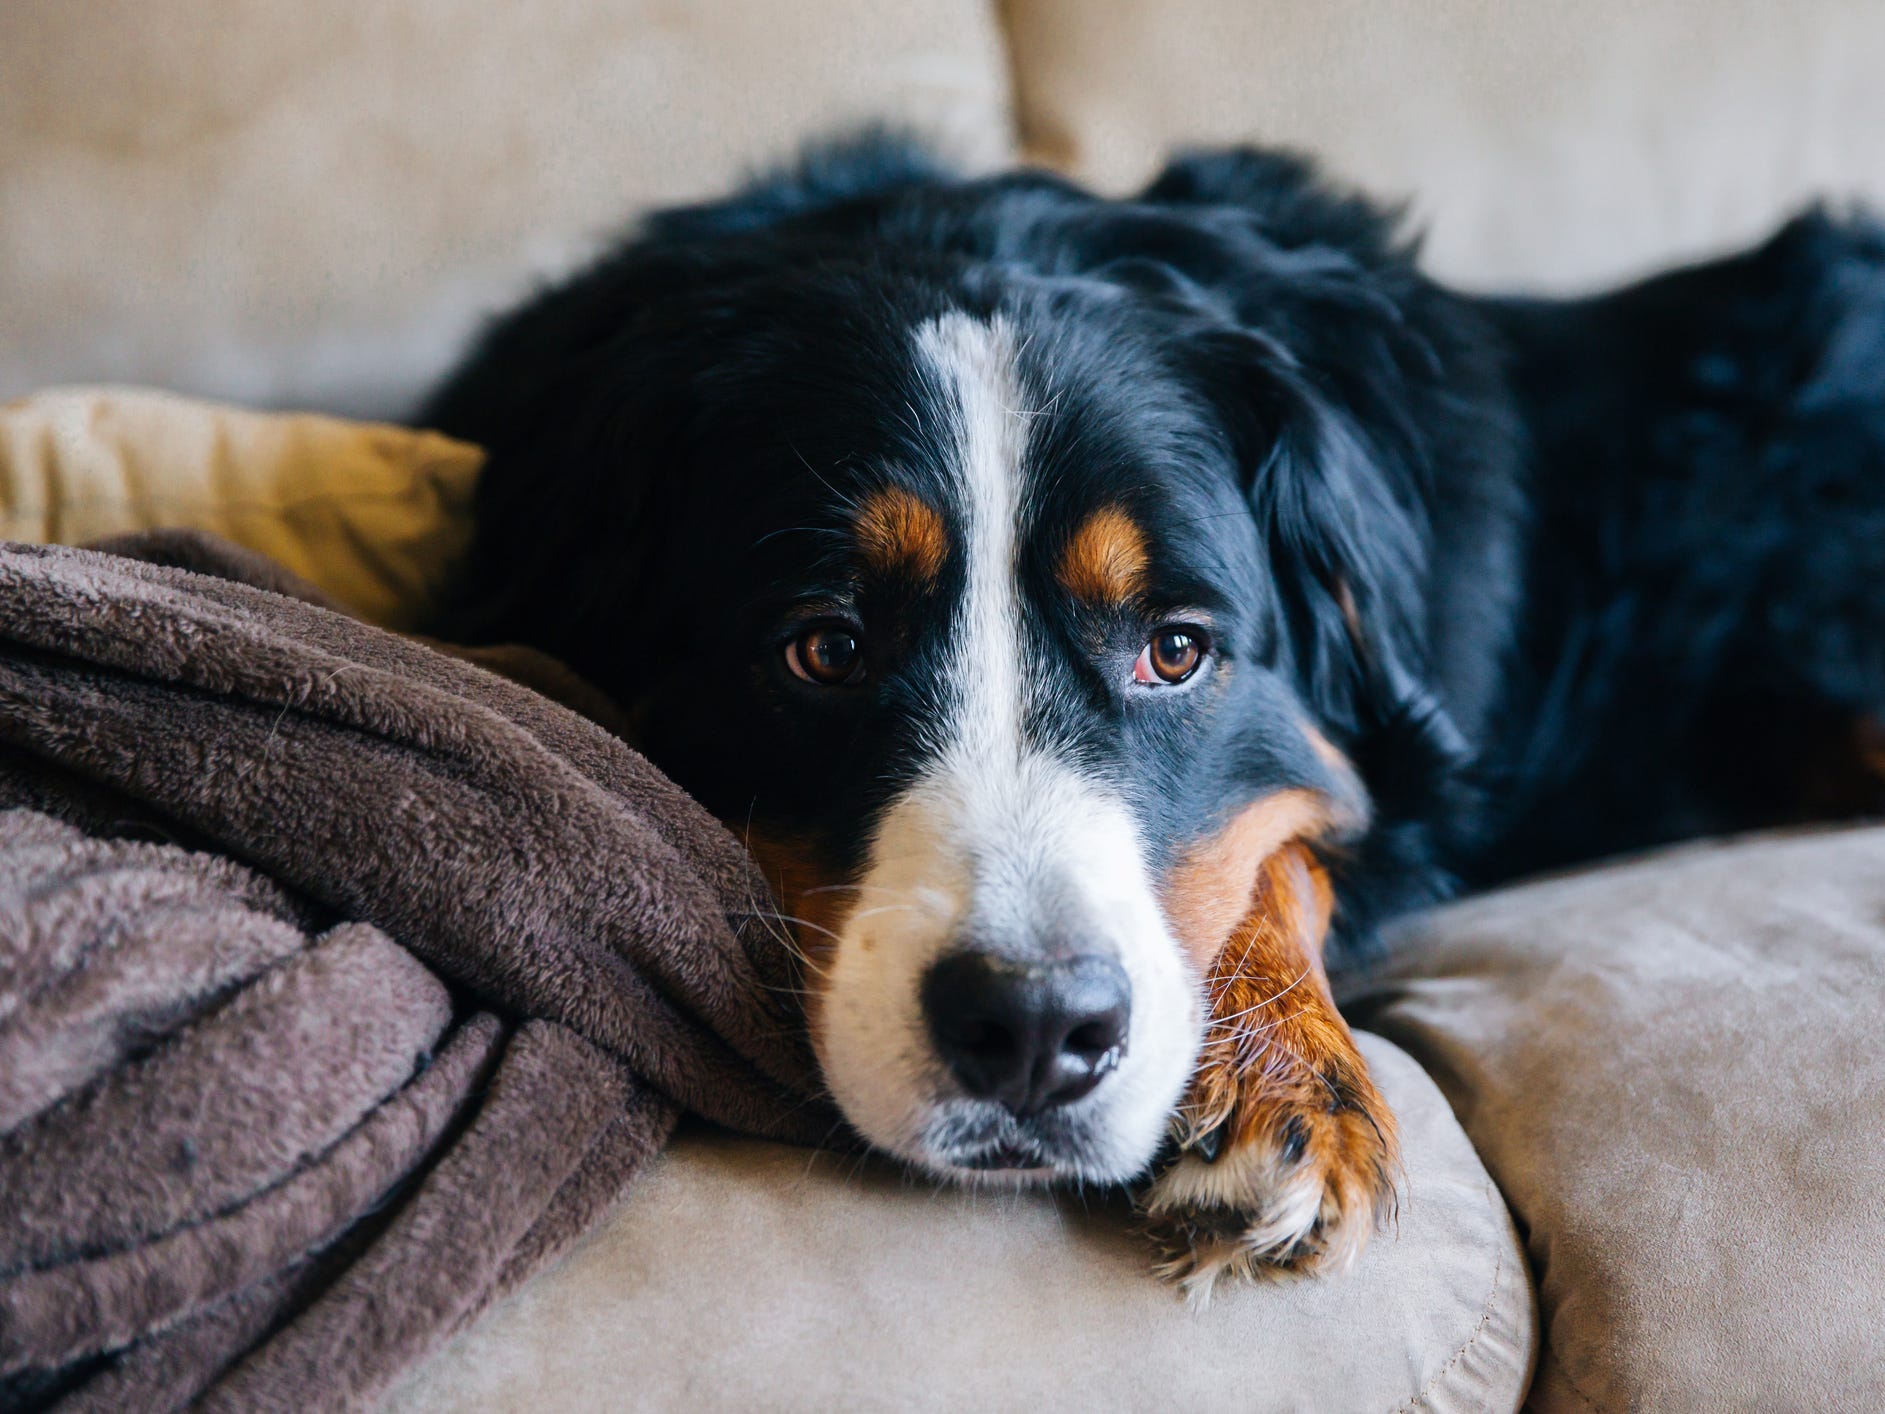 A Bernese mountain dog looking tired on a couch.